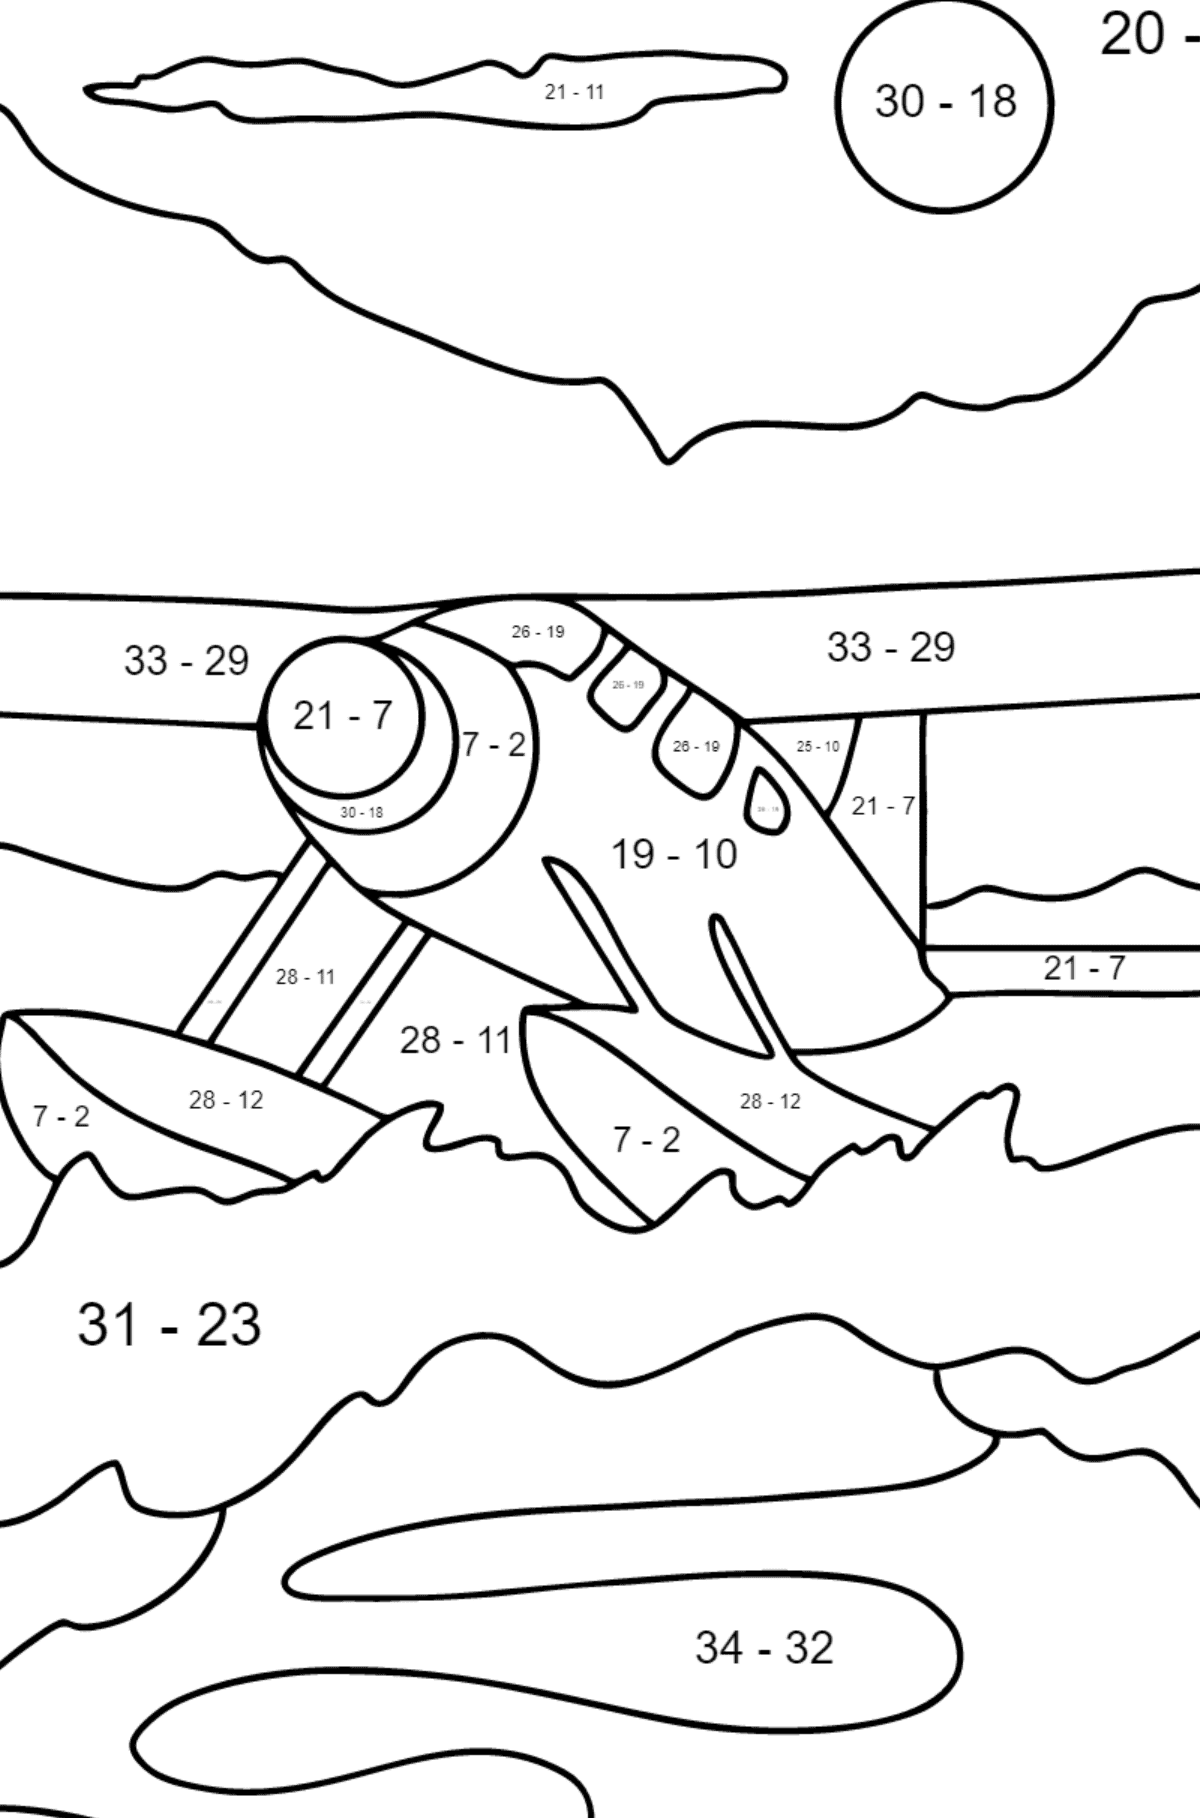 Coloring Page - A Hydroplane - Math Coloring - Subtraction for Kids